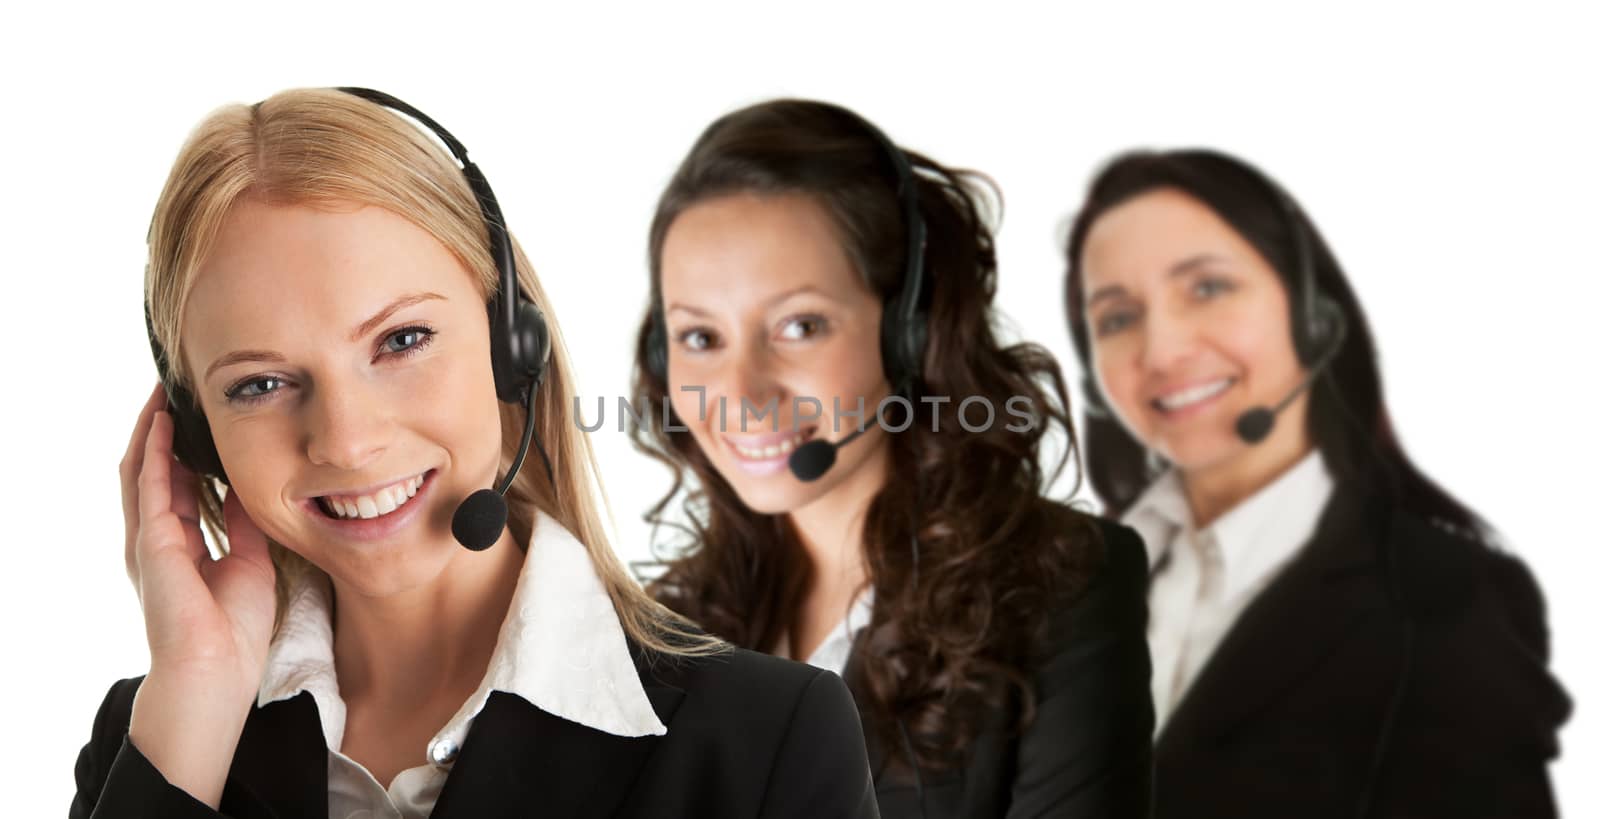 Cheerfull call center operators by AndreyPopov